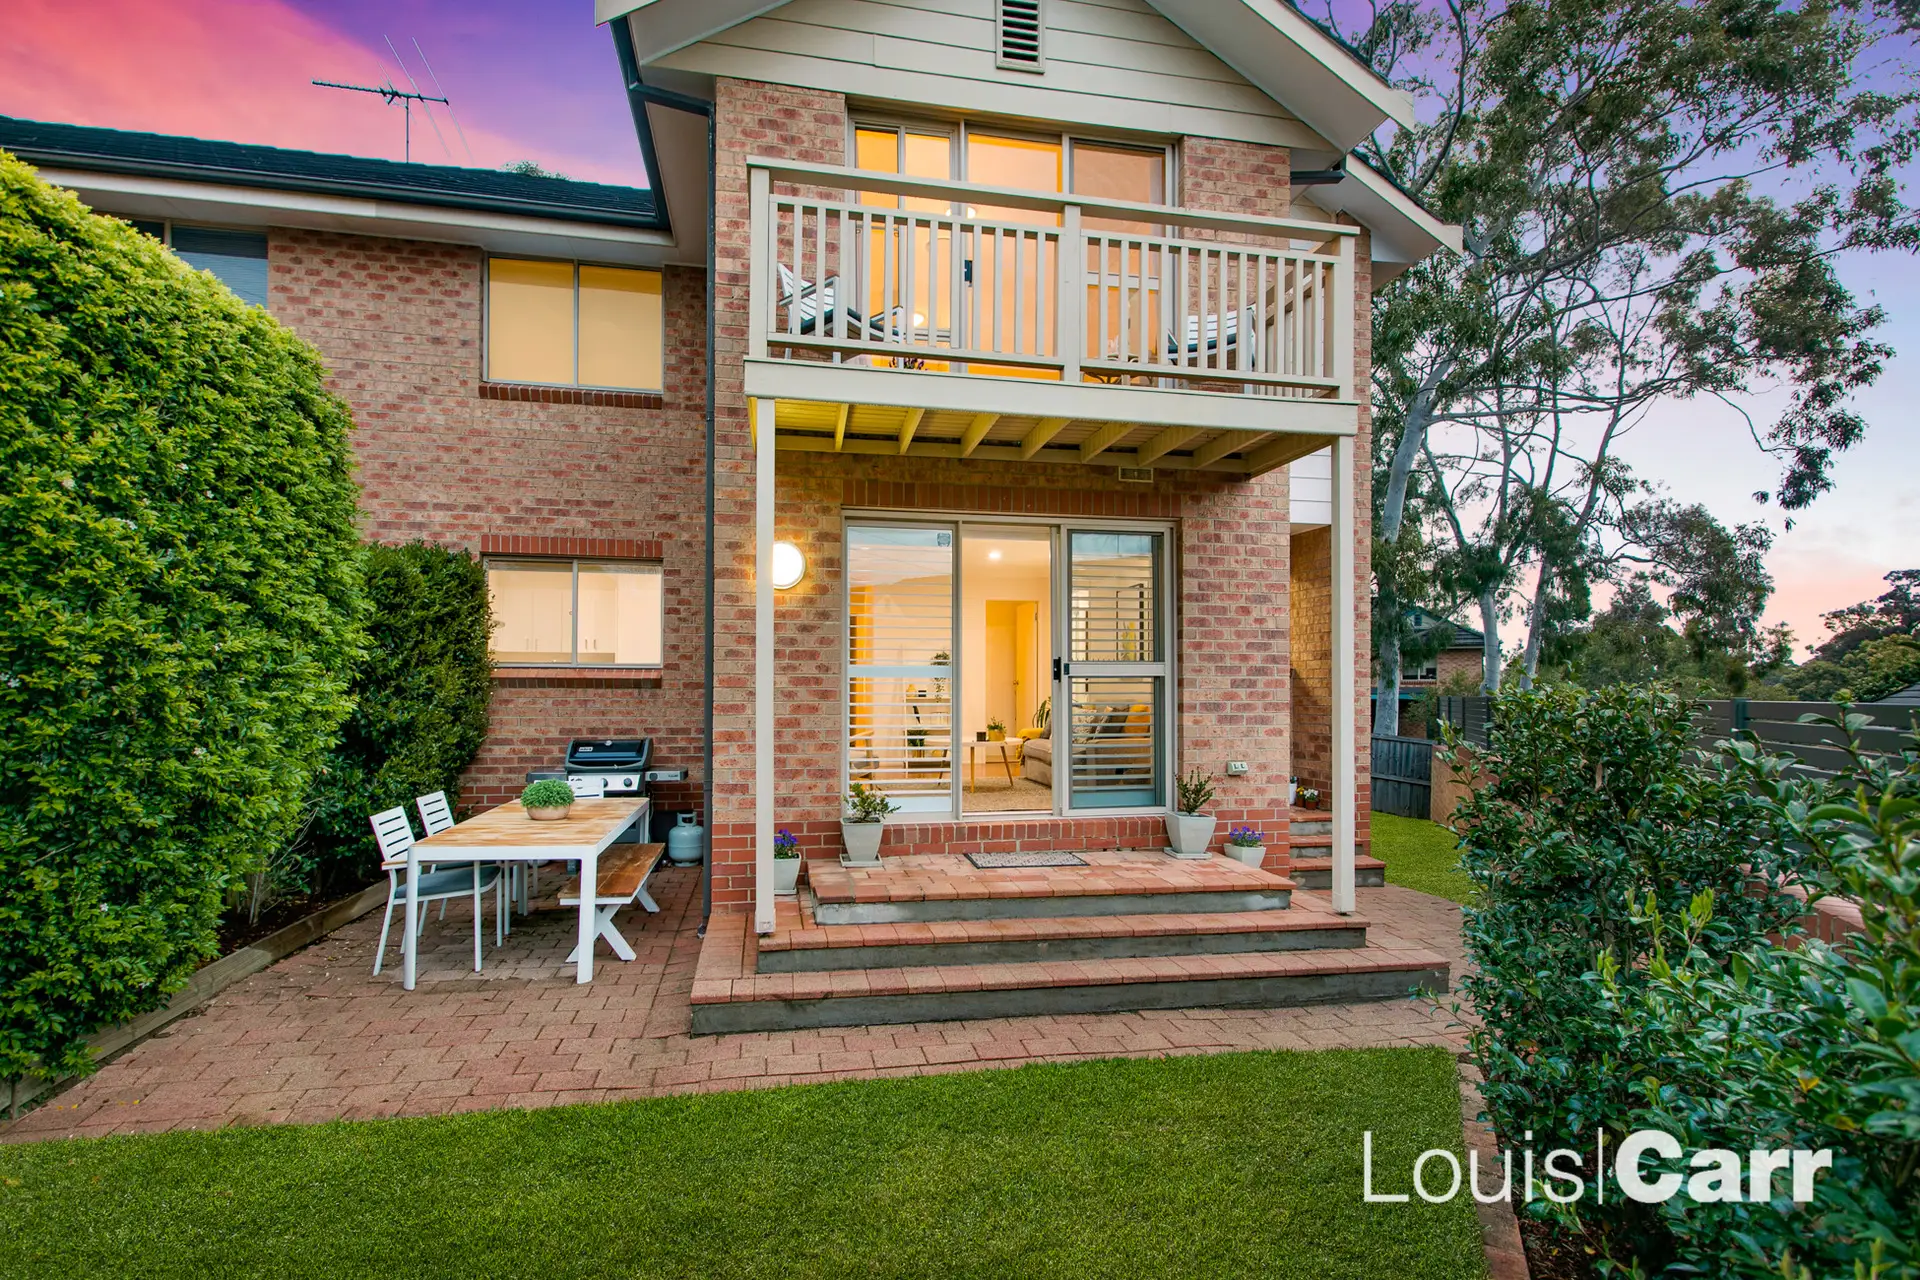 Photo #1: 22/8 View Street, West Pennant Hills - Sold by Louis Carr Real Estate